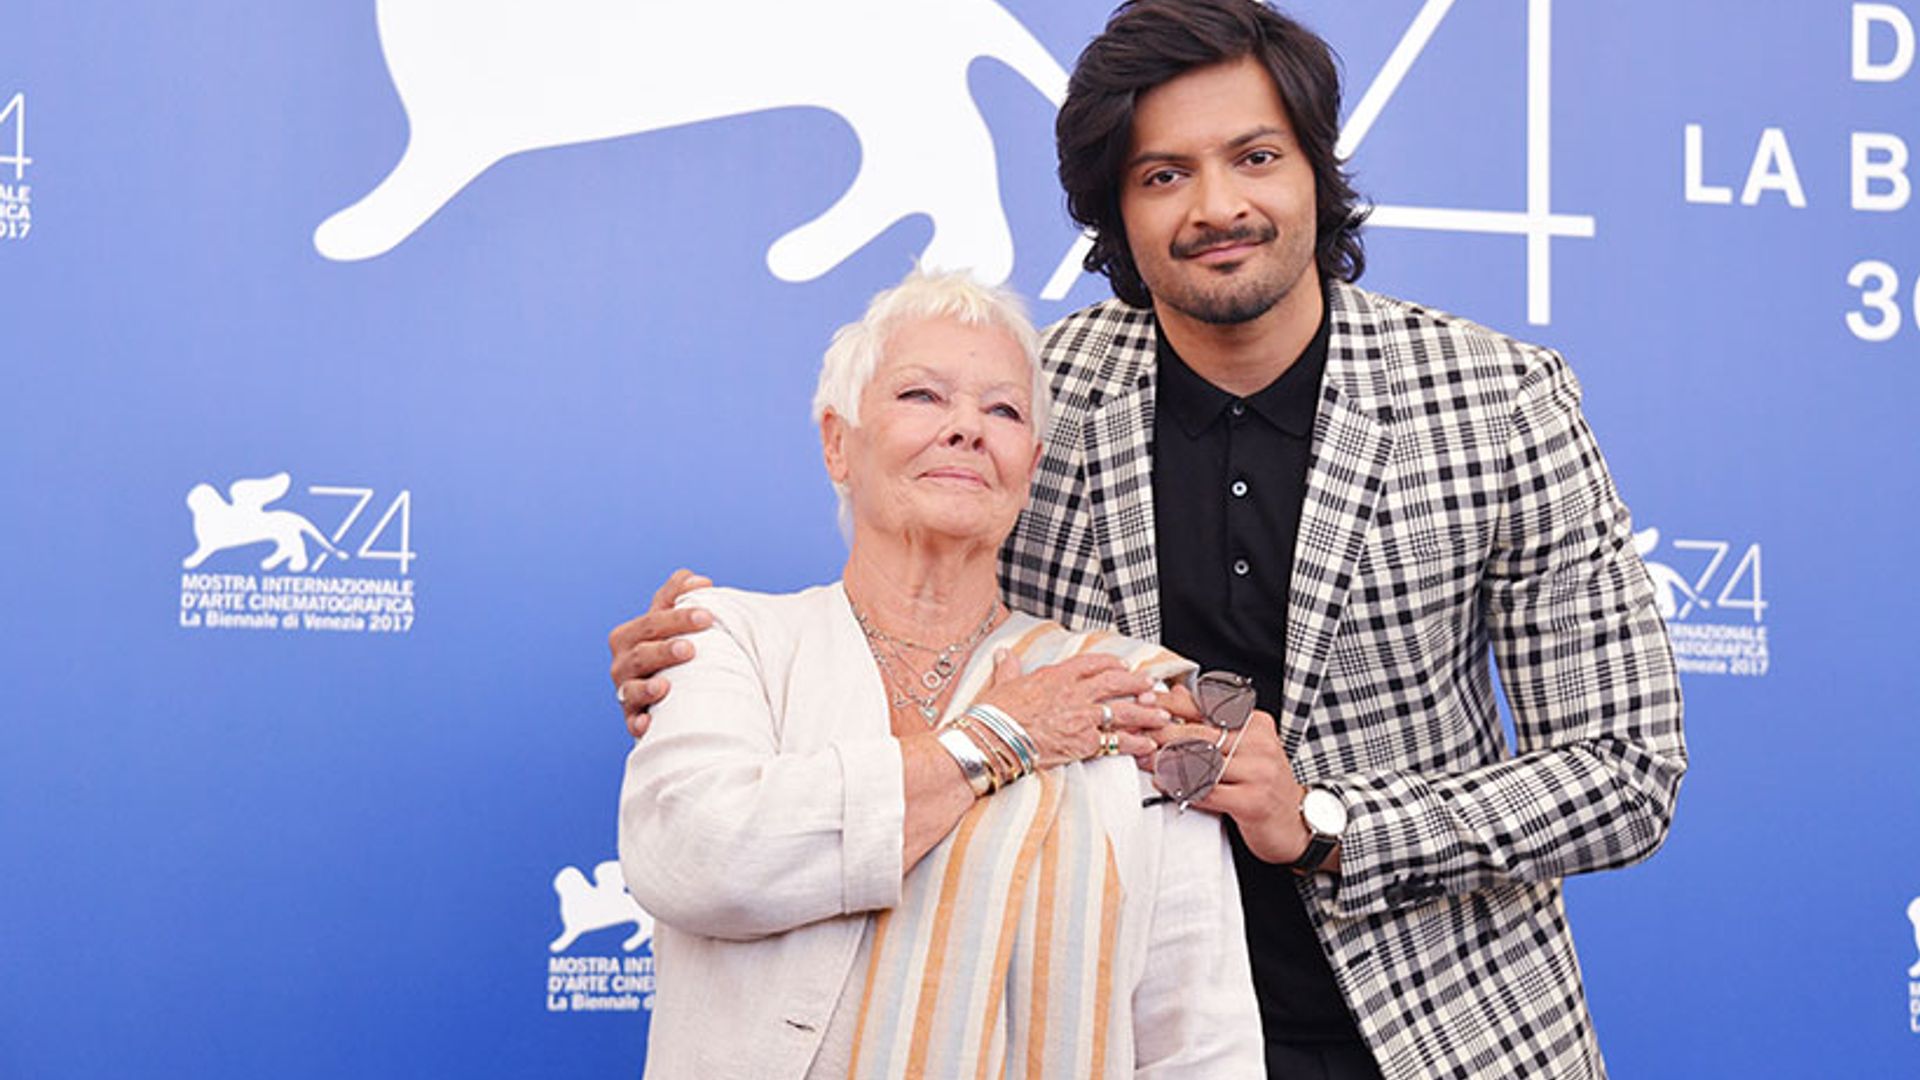 'Hilarious' Judi Dench danced with Victoria and Abdul co-stars in make-up trailer